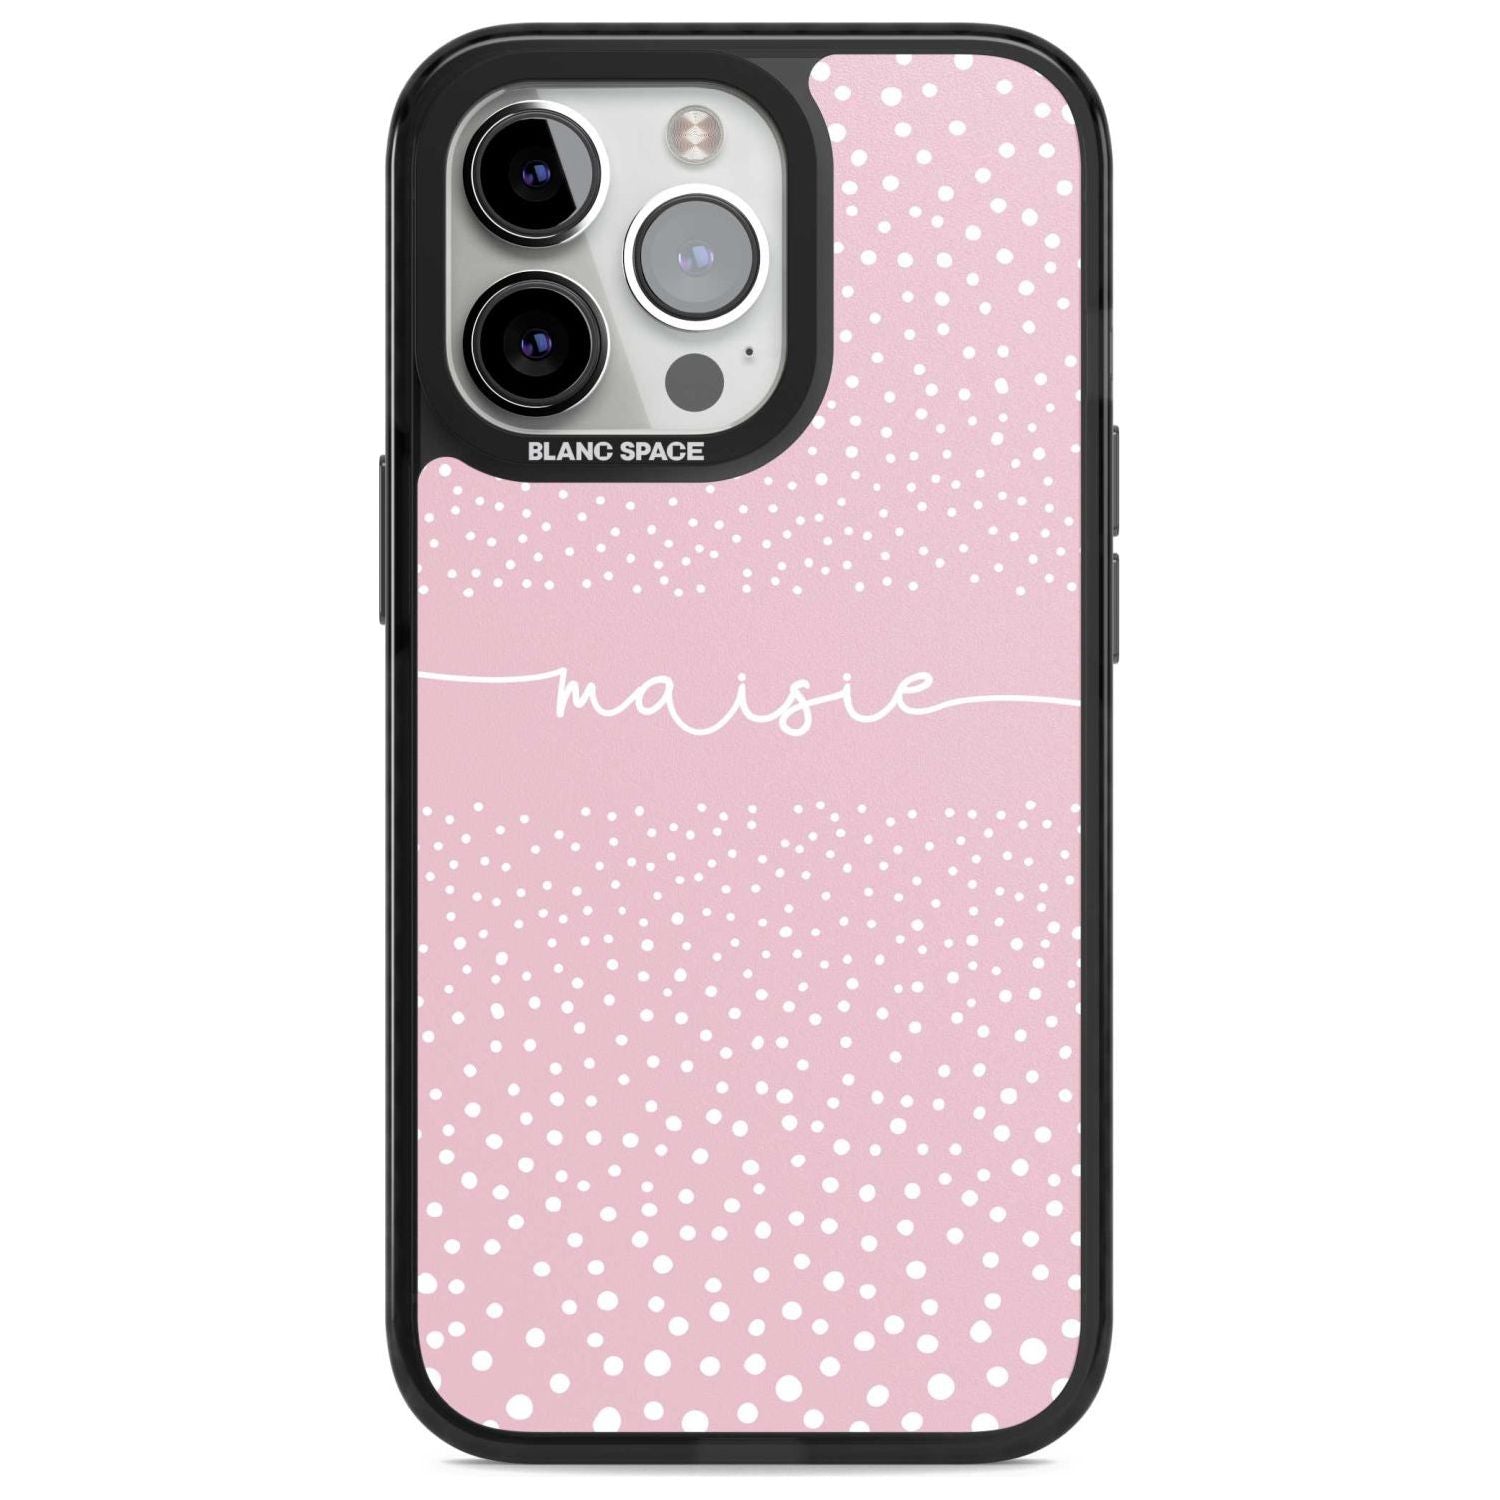 Personalised Pink Dots Custom Phone Case iPhone 15 Pro Max / Magsafe Black Impact Case,iPhone 15 Pro / Magsafe Black Impact Case,iPhone 14 Pro Max / Magsafe Black Impact Case,iPhone 14 Pro / Magsafe Black Impact Case,iPhone 13 Pro / Magsafe Black Impact Case Blanc Space